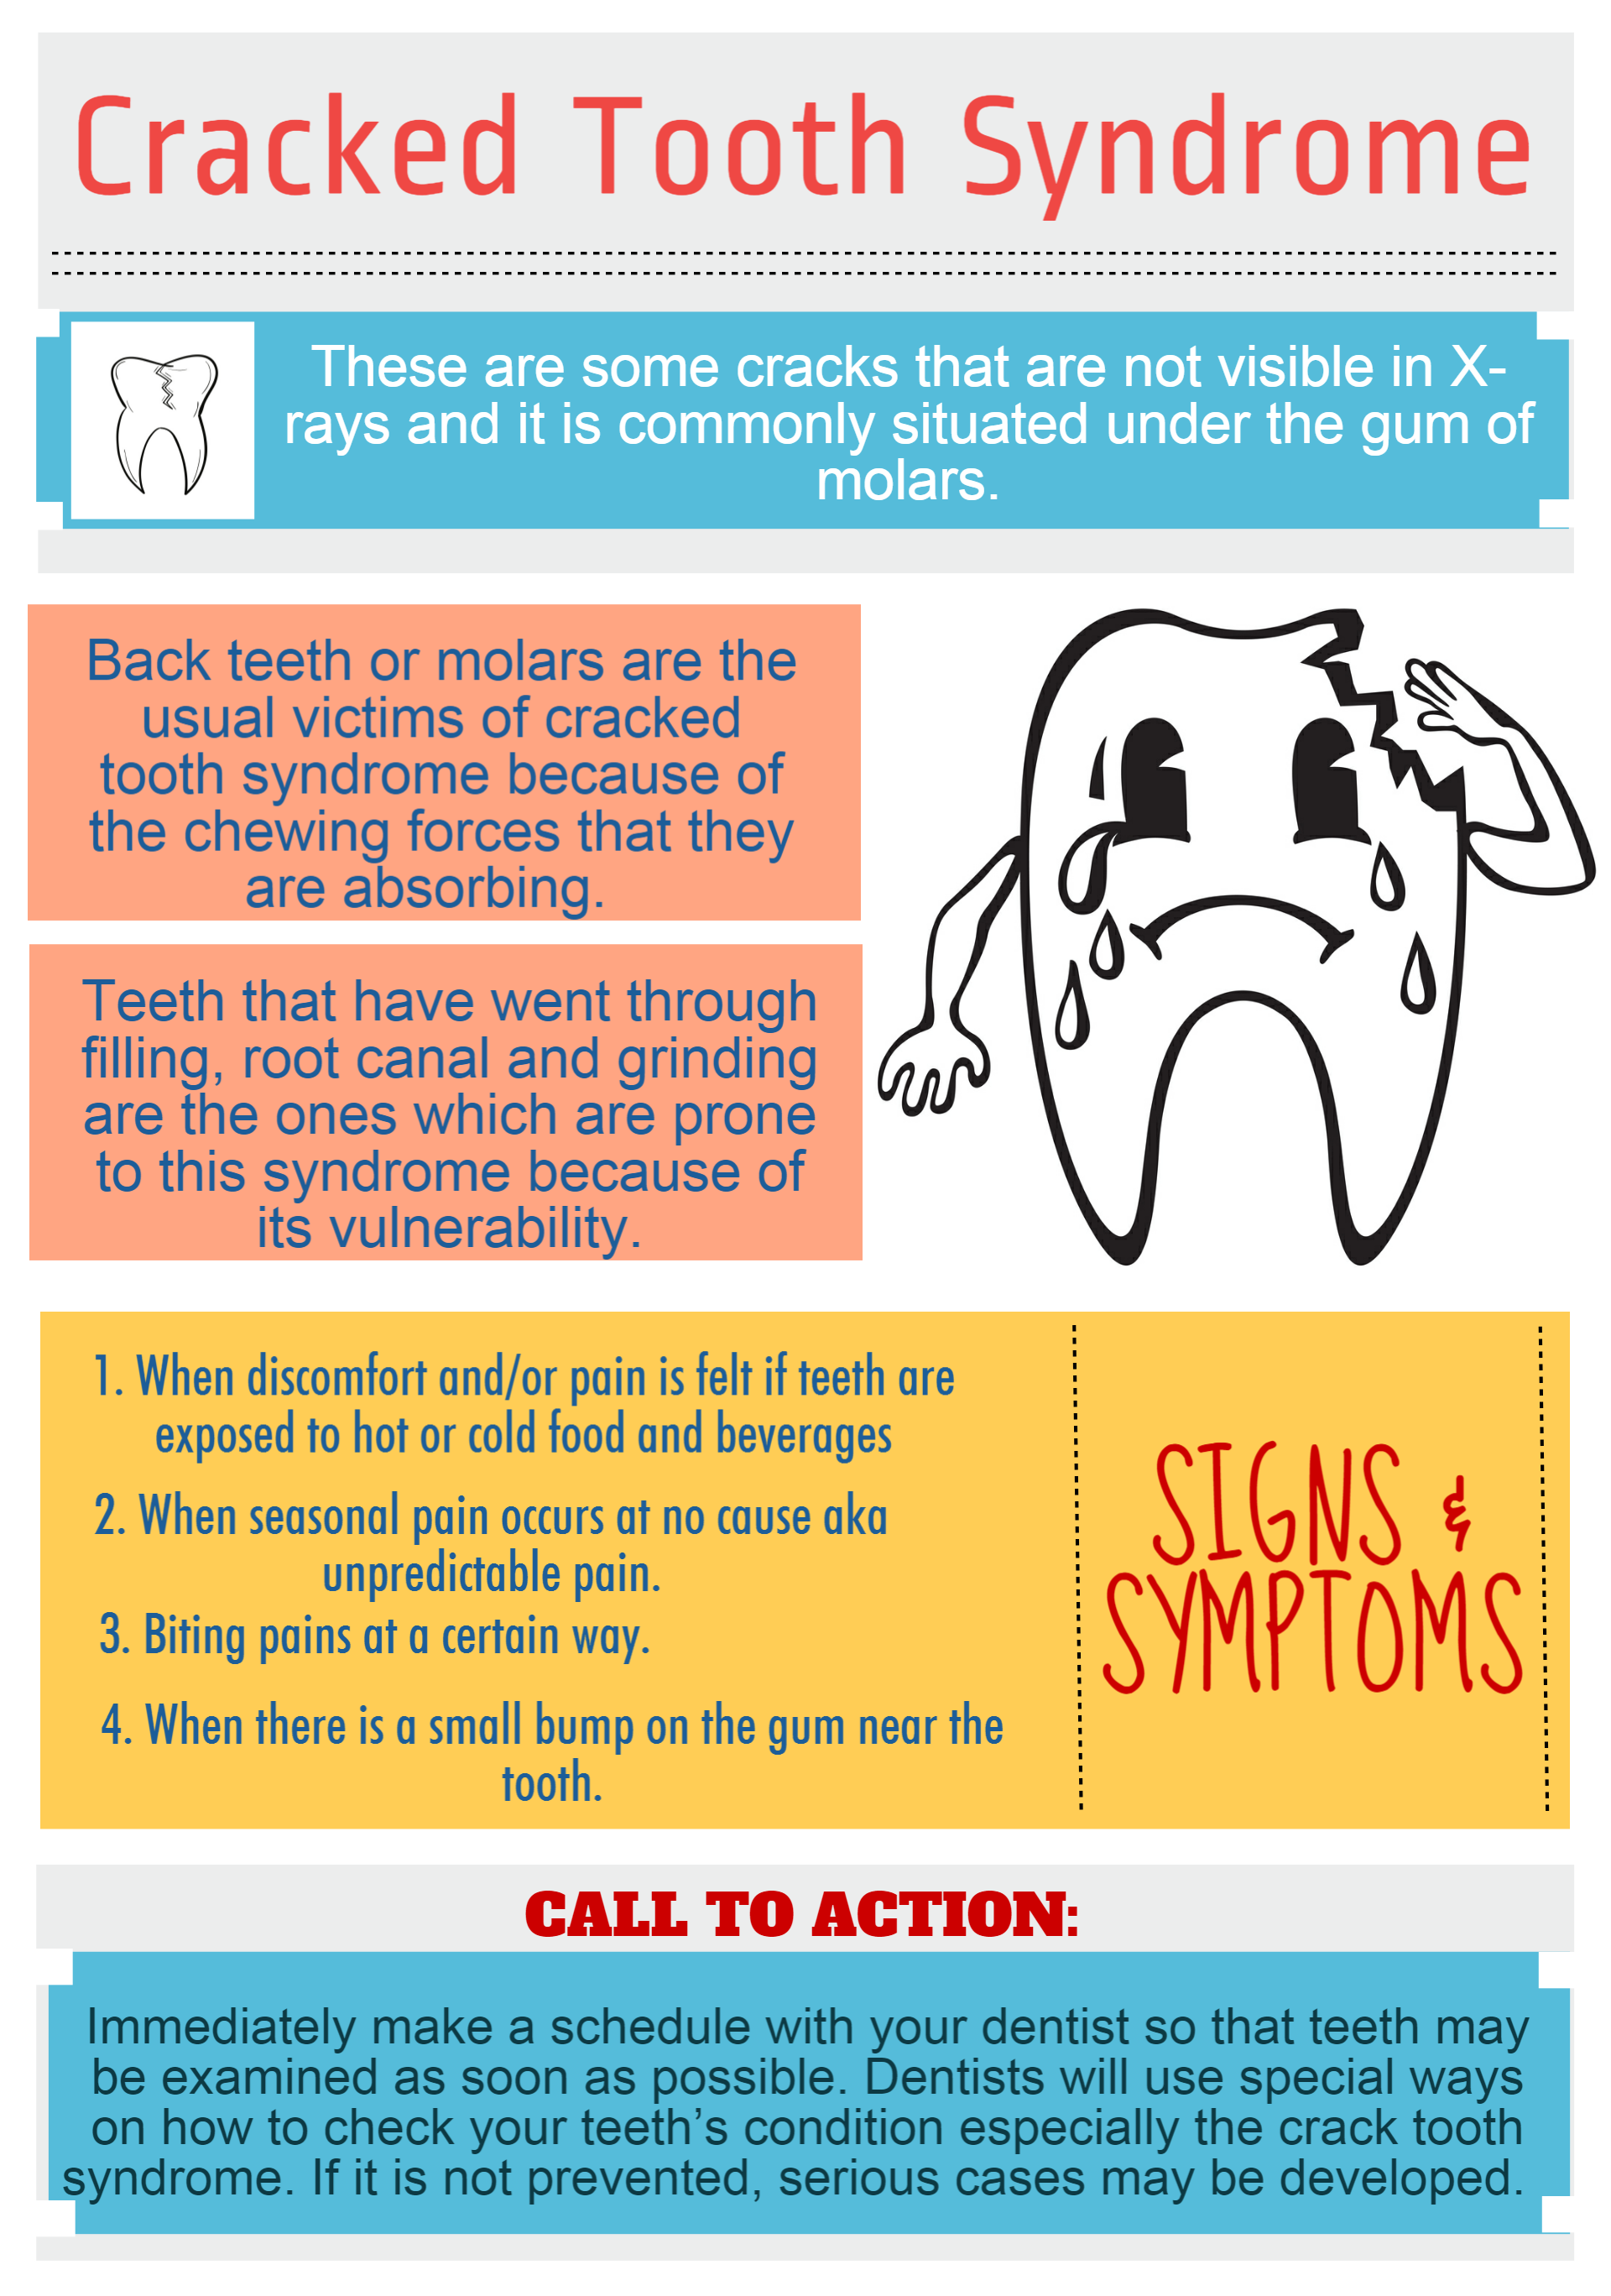 Cracked Tooth Syndrome | Visual.ly